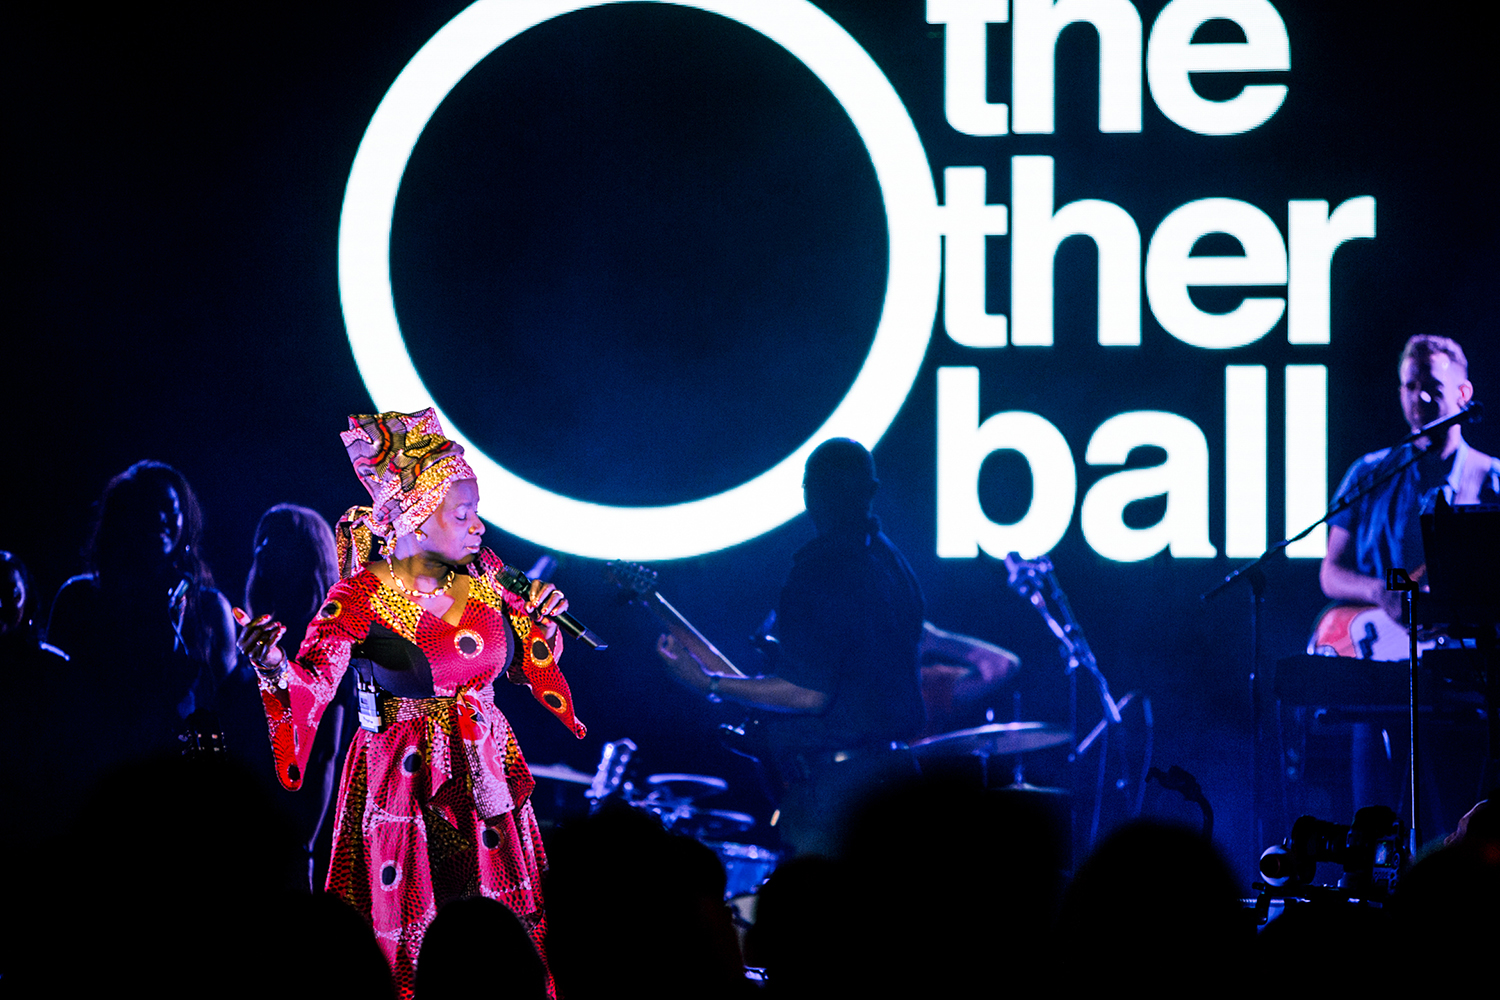 The Other Ball - 011.jpg